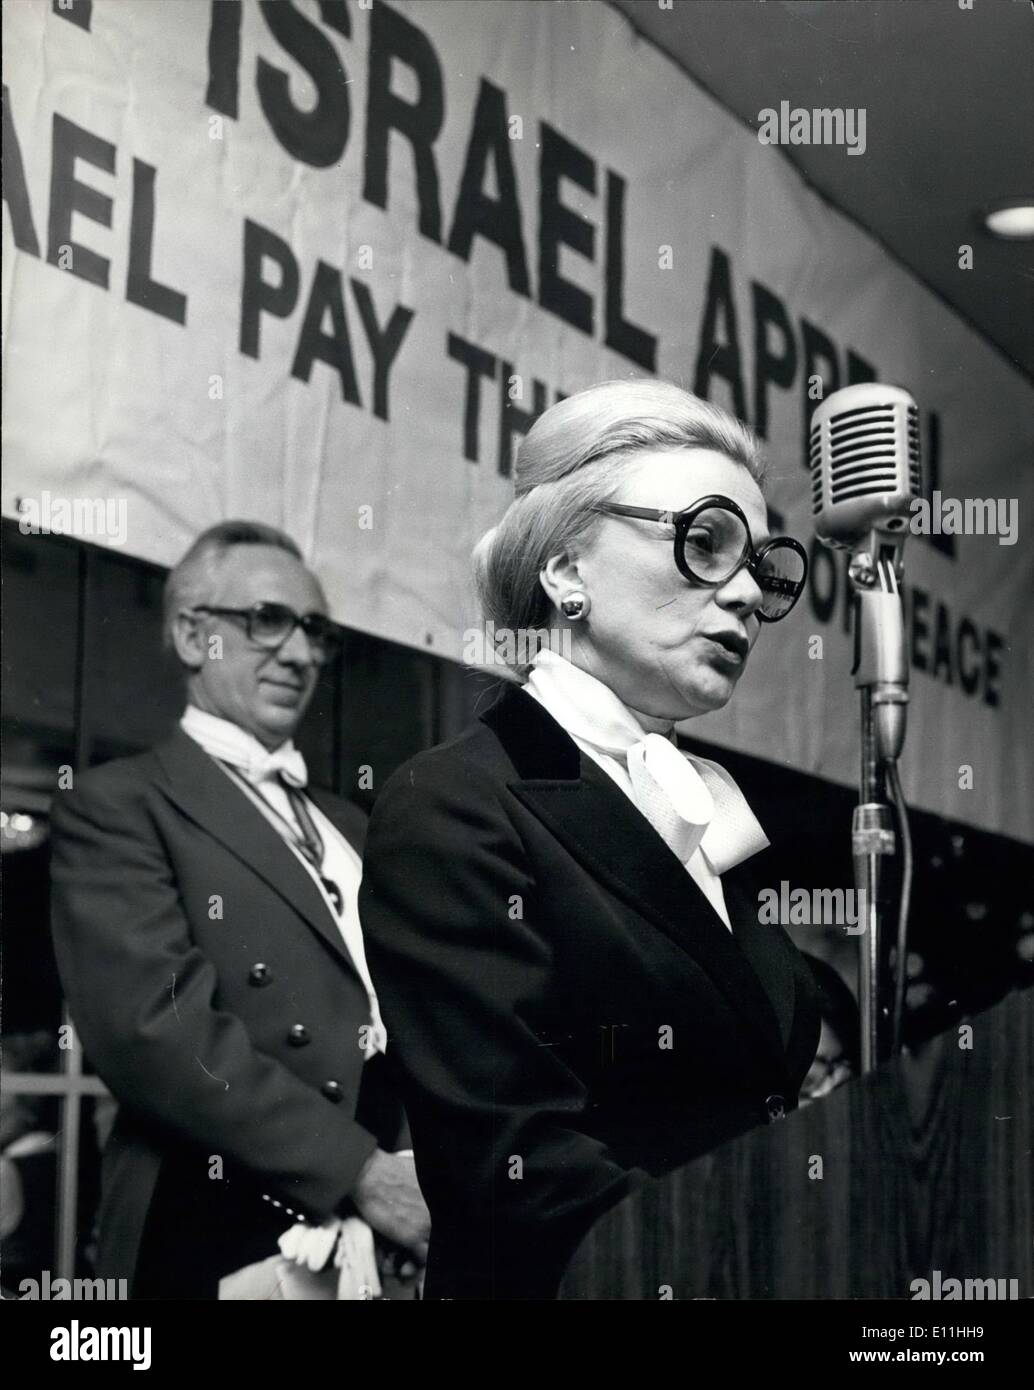 Mar. 03, 1978 - Mrs. Moshe Dayan speaks at AK Luncheon in London: Mrs. Rachel Dayan the wife of Israel foreign minister Moshe Dayan, who is in London for a visit, addressed the joint Israel Appeal (women division) Annual Luncheon in London yesterday. Photo shows Mrs Rachel Dayan during her address to the joint Israel Appeal Luncheon in London yesterday. Stock Photo